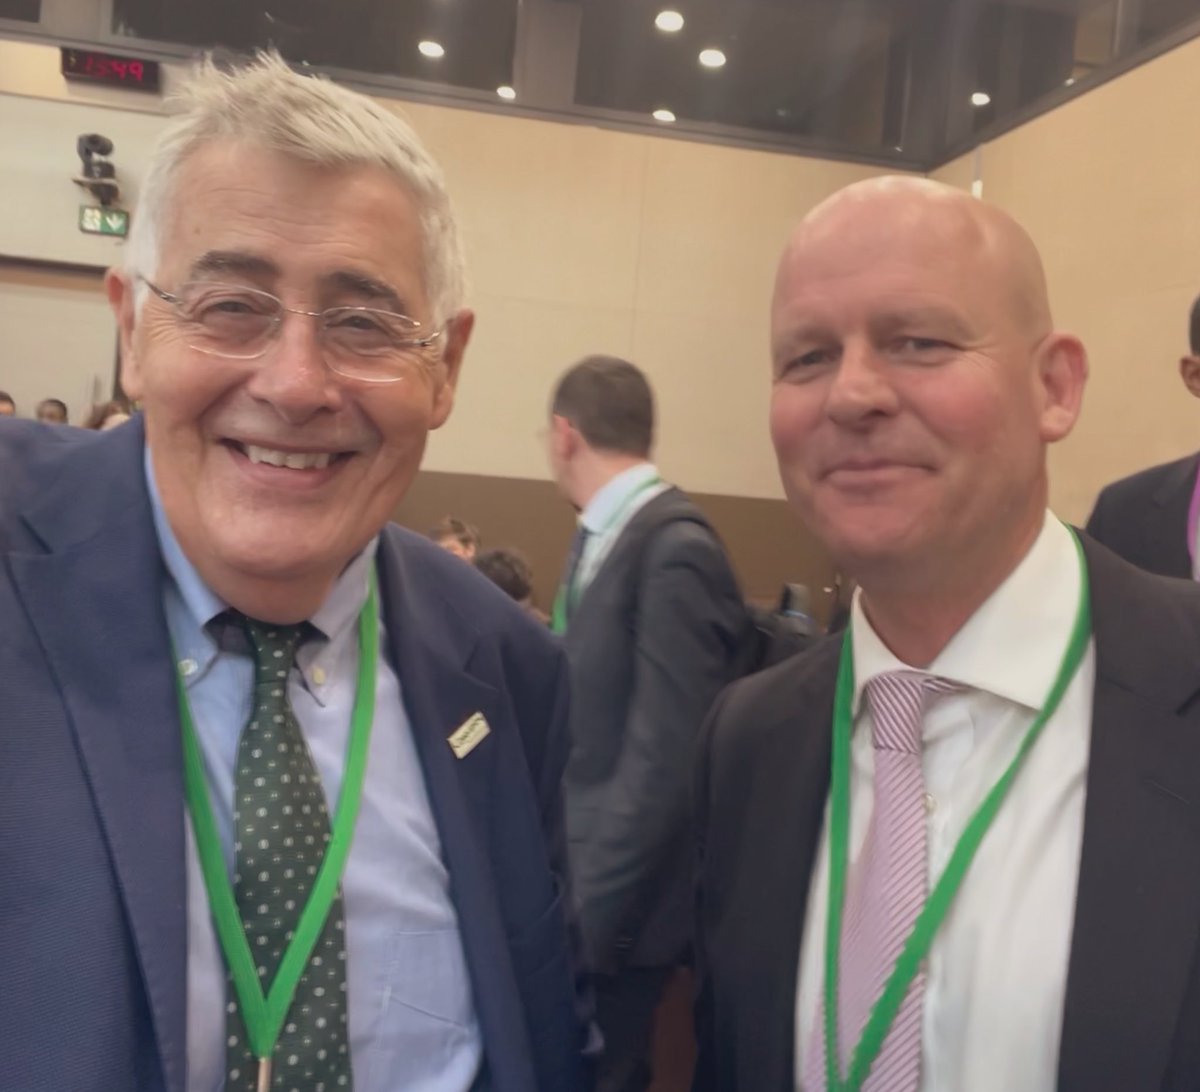 Good to meet with Goal's Colin Lee at the Sudan conference, both Concern & Goal responding to the growing humanitarian crisis in Darfur supported by @Irish_Aid & the people at home @Concern @GOAL_Global